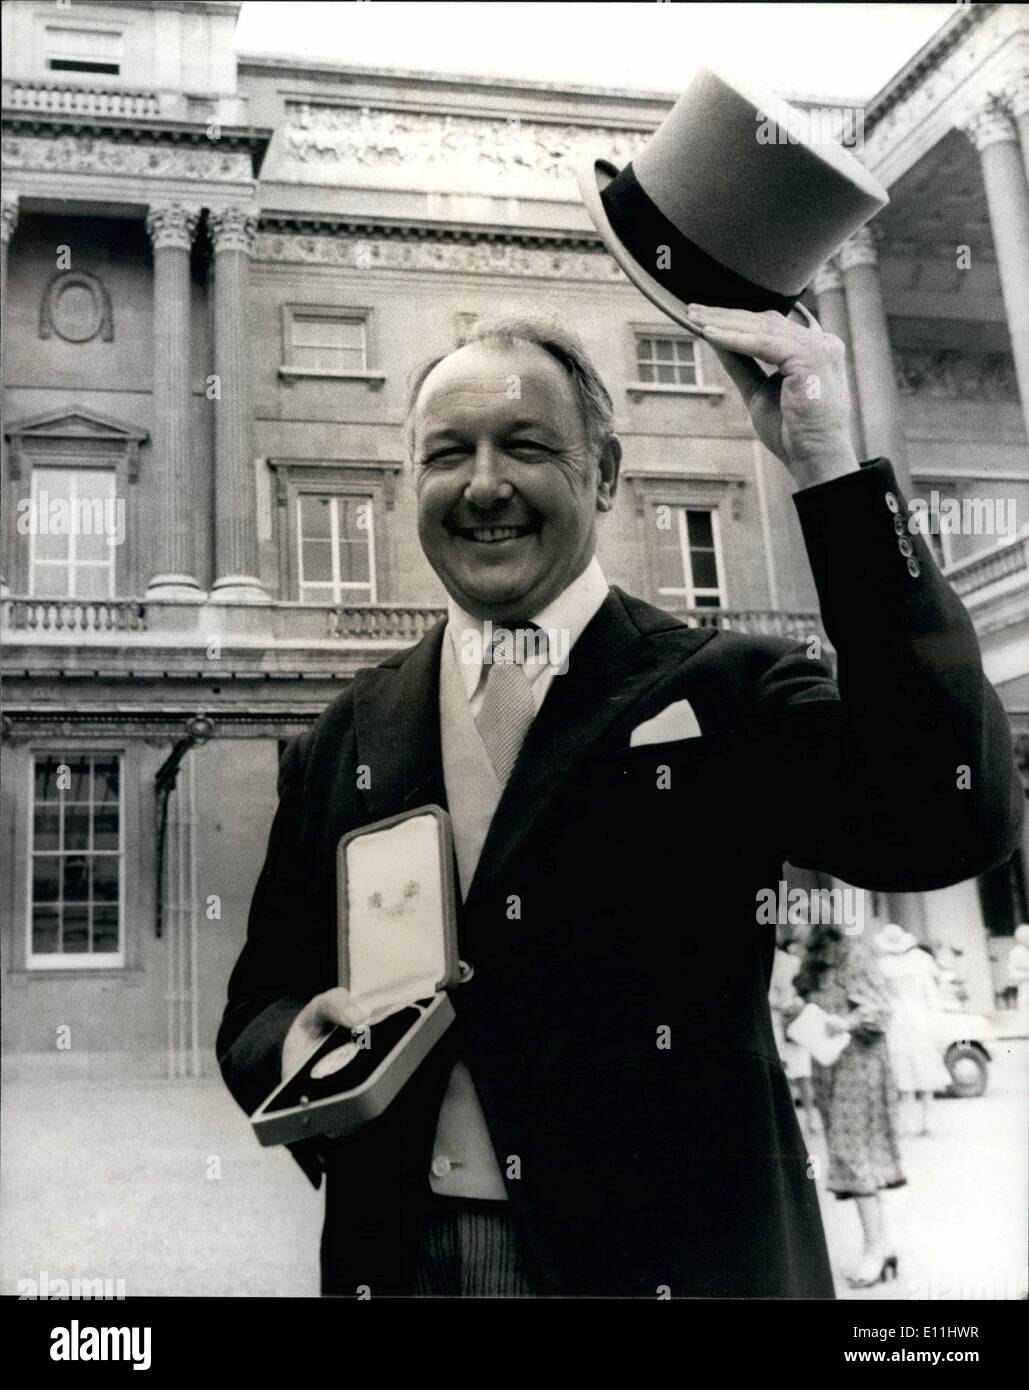 Jul. 07, 1978 - Sir Freddie Laker Receives his Knighthood.: Sir Freddie Laker of Skytrain fame went to Buckingham Palace this morning to receive his Knighthood from the Queen. Photo shows Sir Freddie doff's his topper after receiving his Knighthood from the Queen at Buckingham Palace this morning. Stock Photo